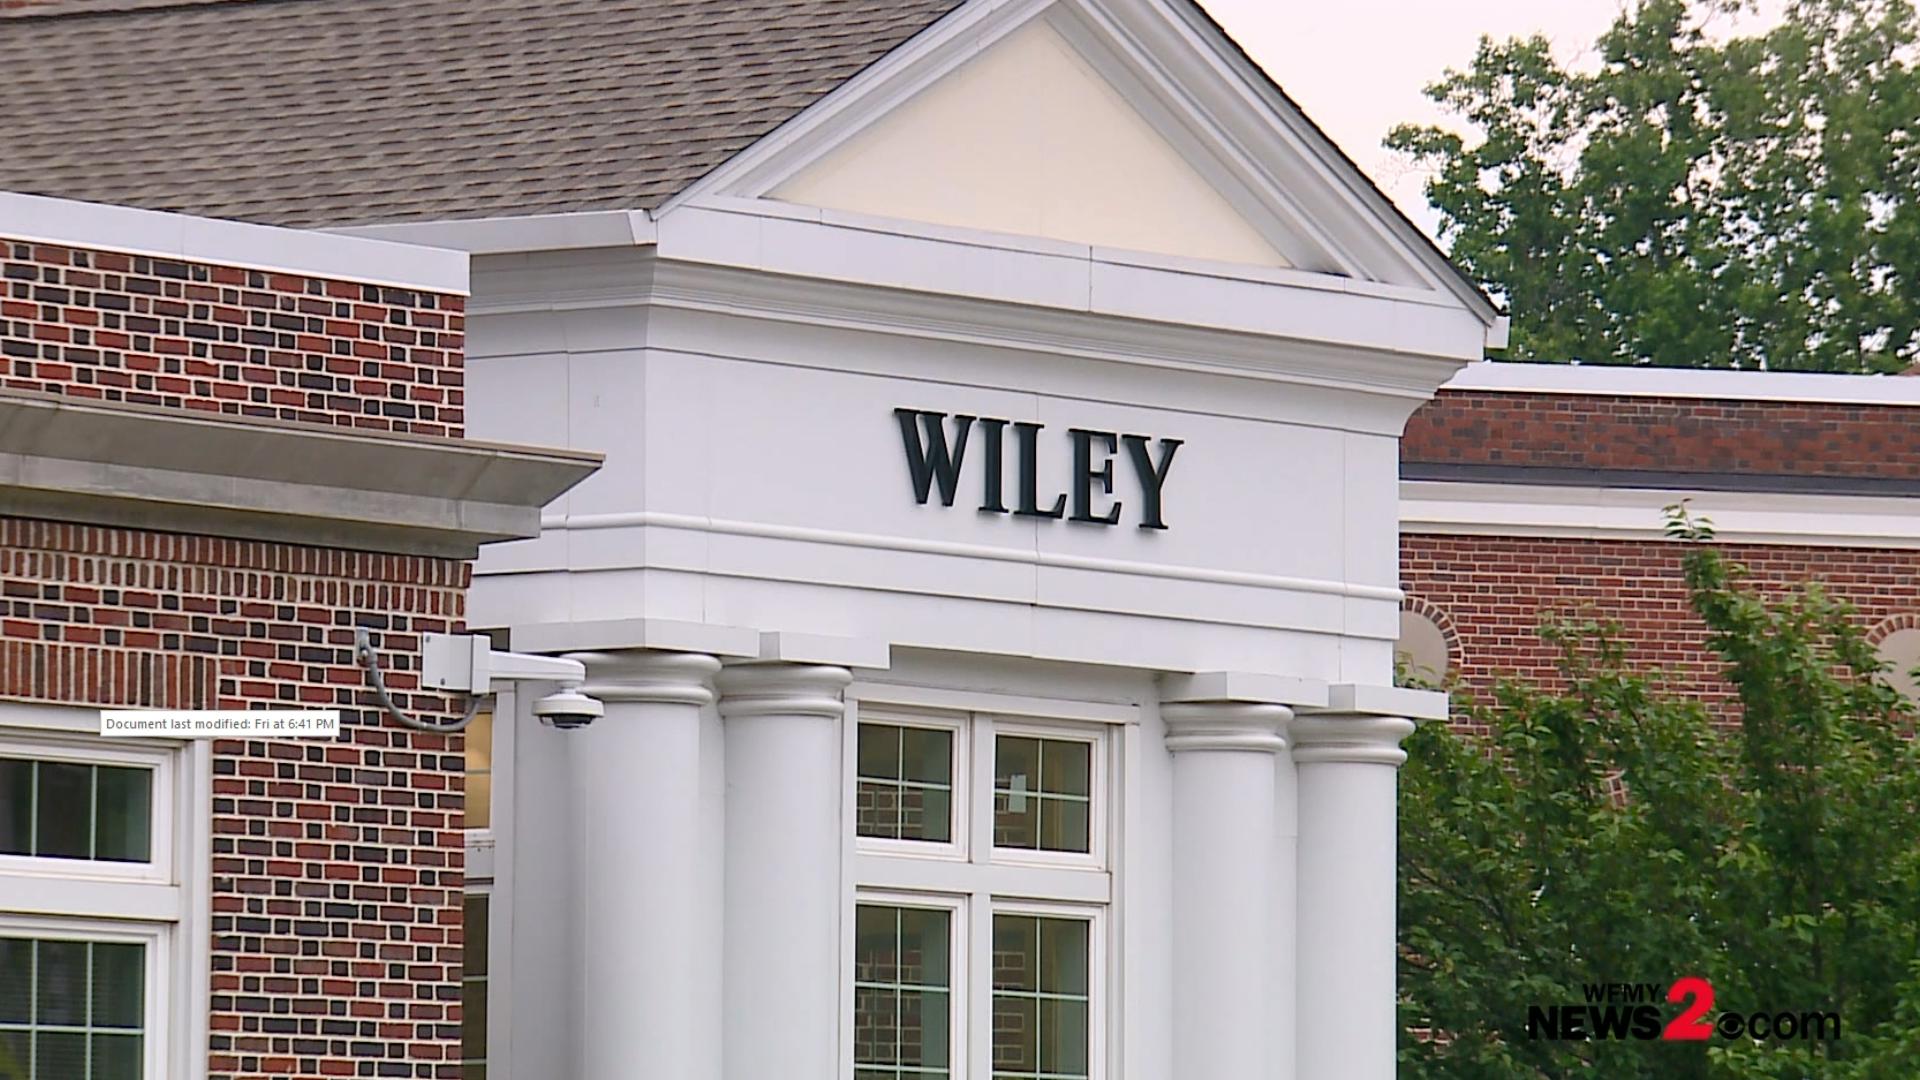 The Forsyth County Sheriff's Office said a student has been charged after making a threat against Wiley Middle School on social media.